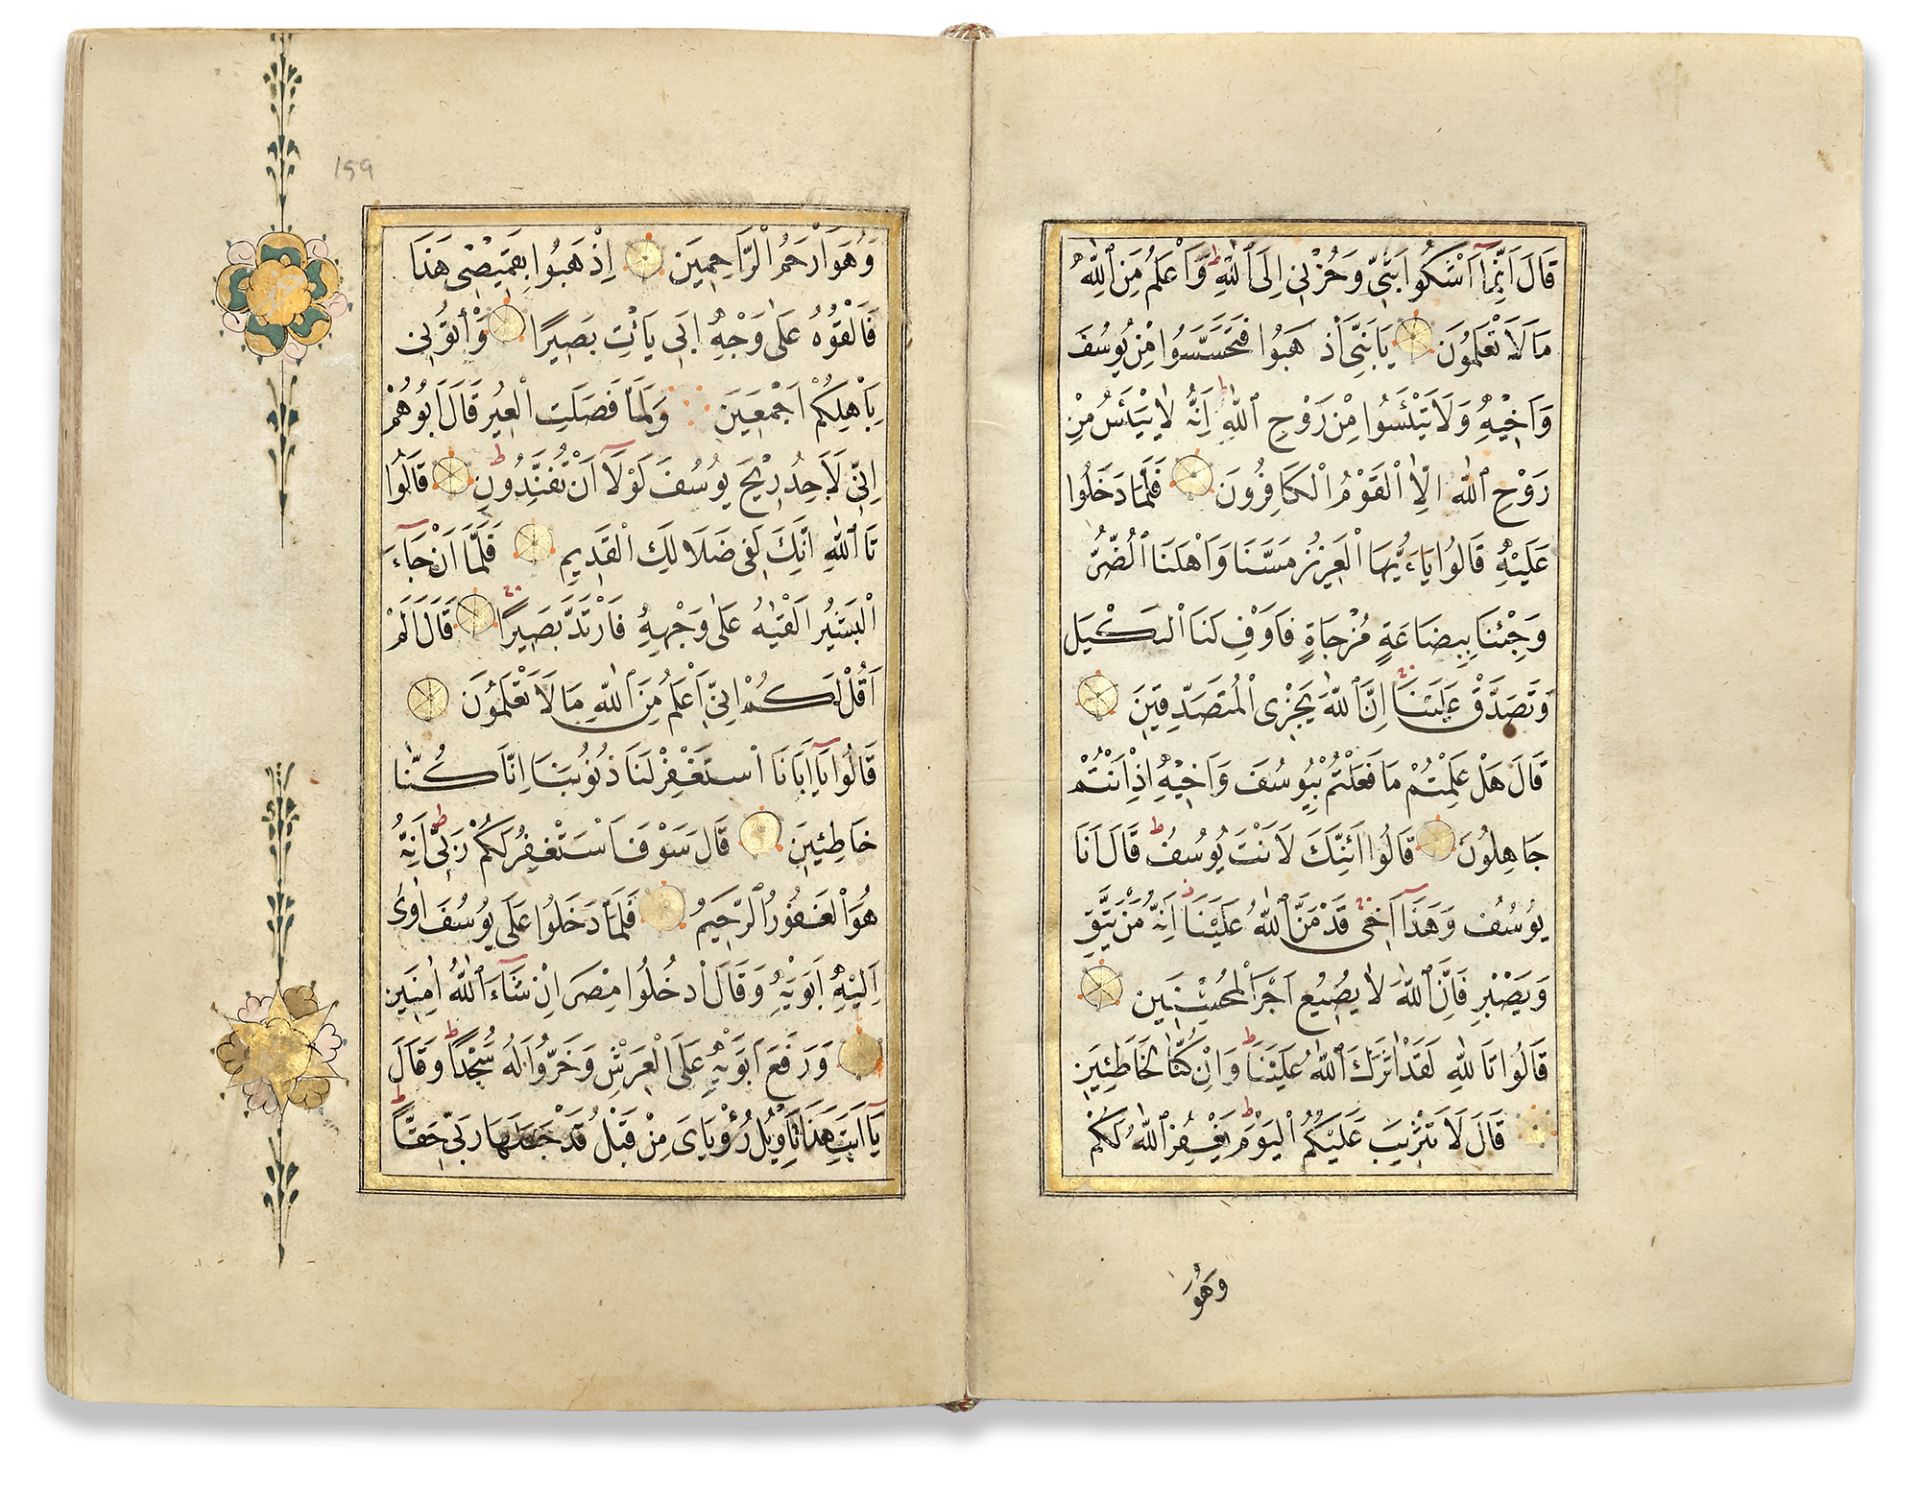 AN ILLUMINATED OTTOMAN QURAN SIGNED BY AHMED STUDENT OF HAFIZ OSMAN, 18TH CENTURY - Image 2 of 7